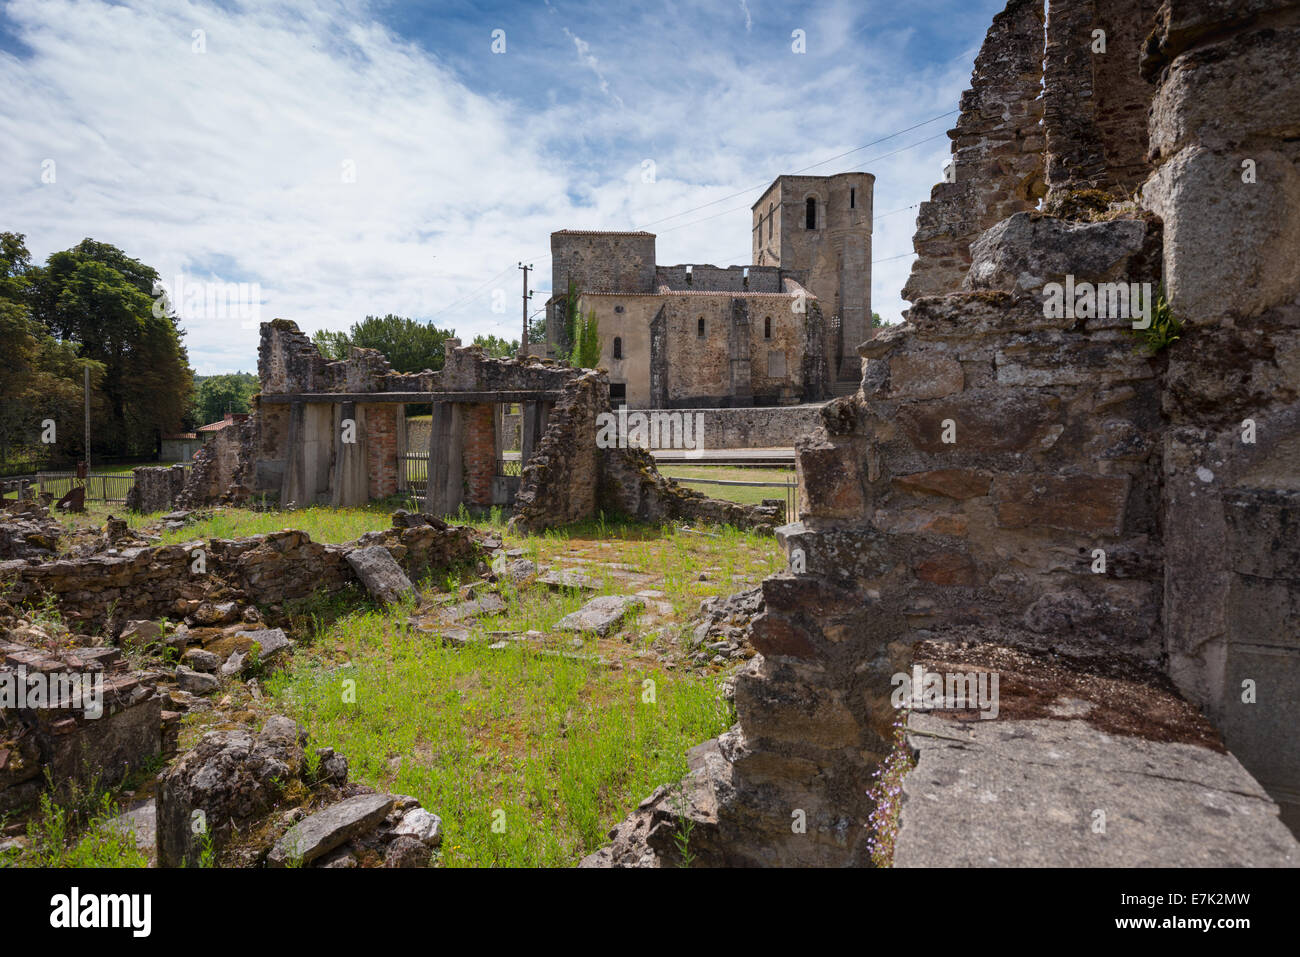 The church of Oradour-sur-Glane destroyed by Waffen-SS in 1944 during World War 2 as reprisals against resistance activity Stock Photo